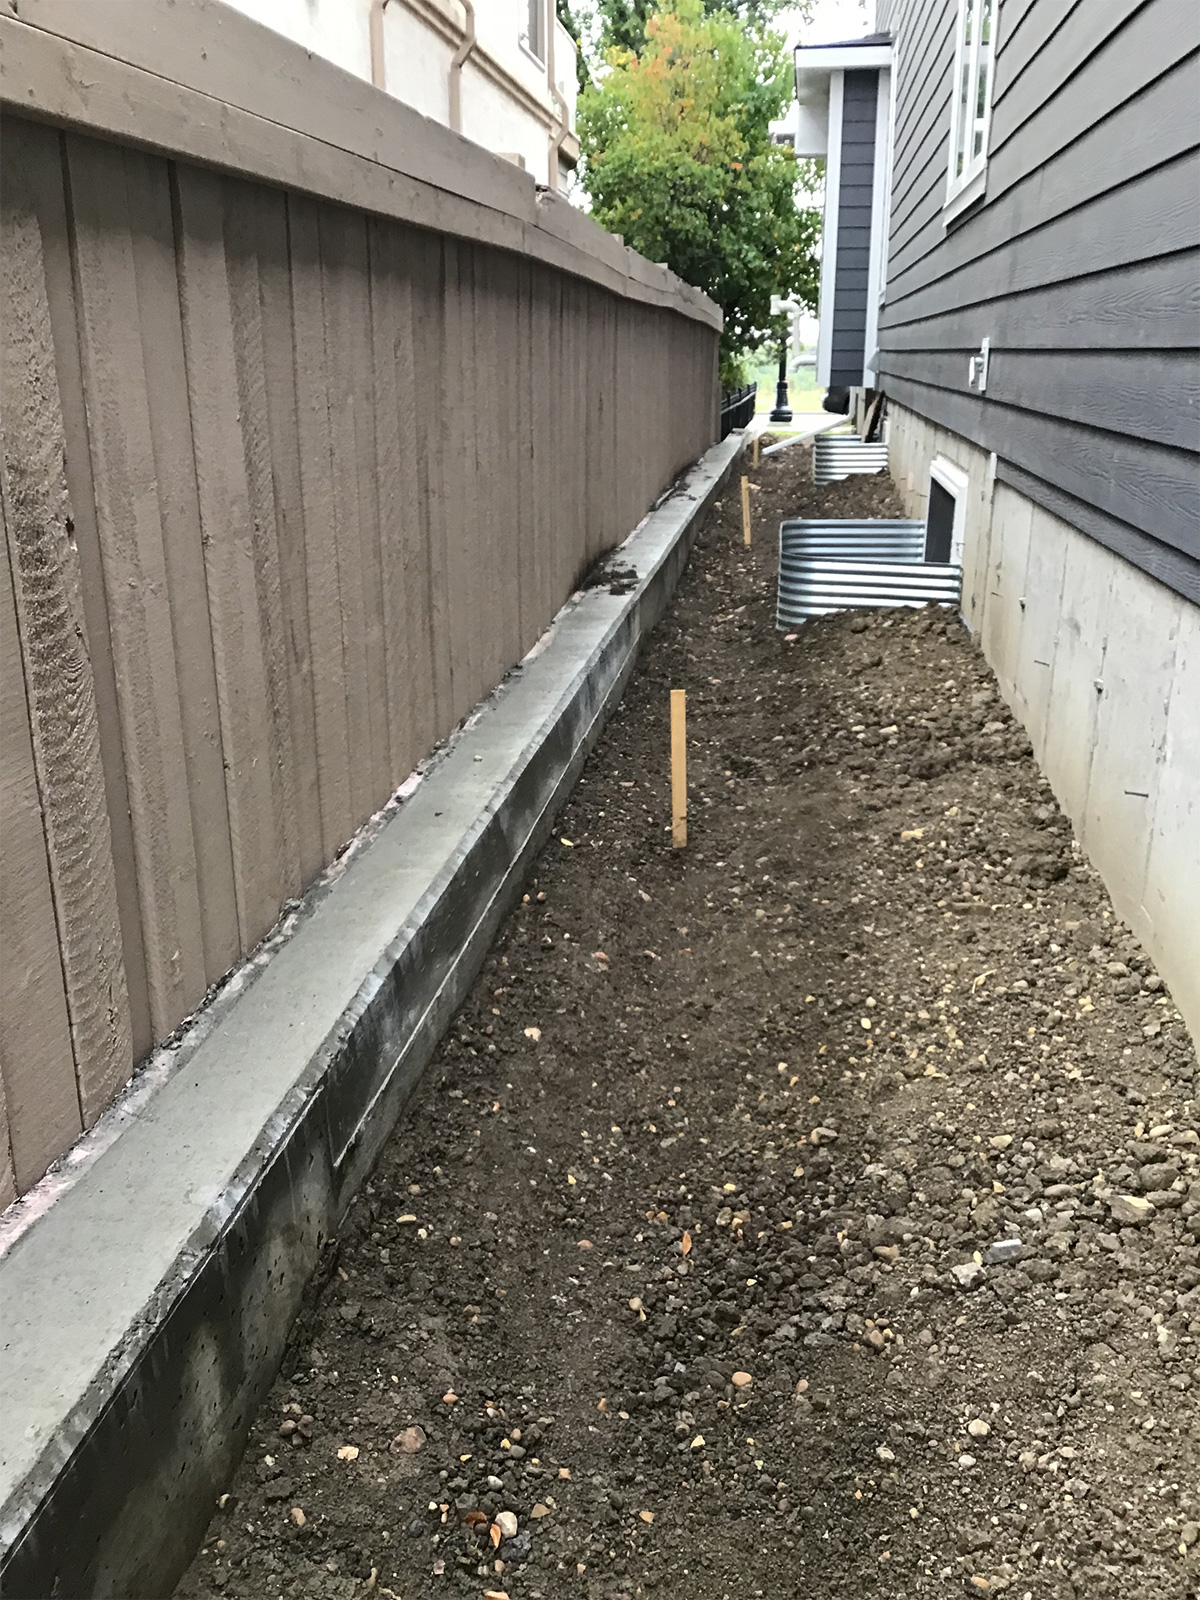 Concrete Retaining wall within private property